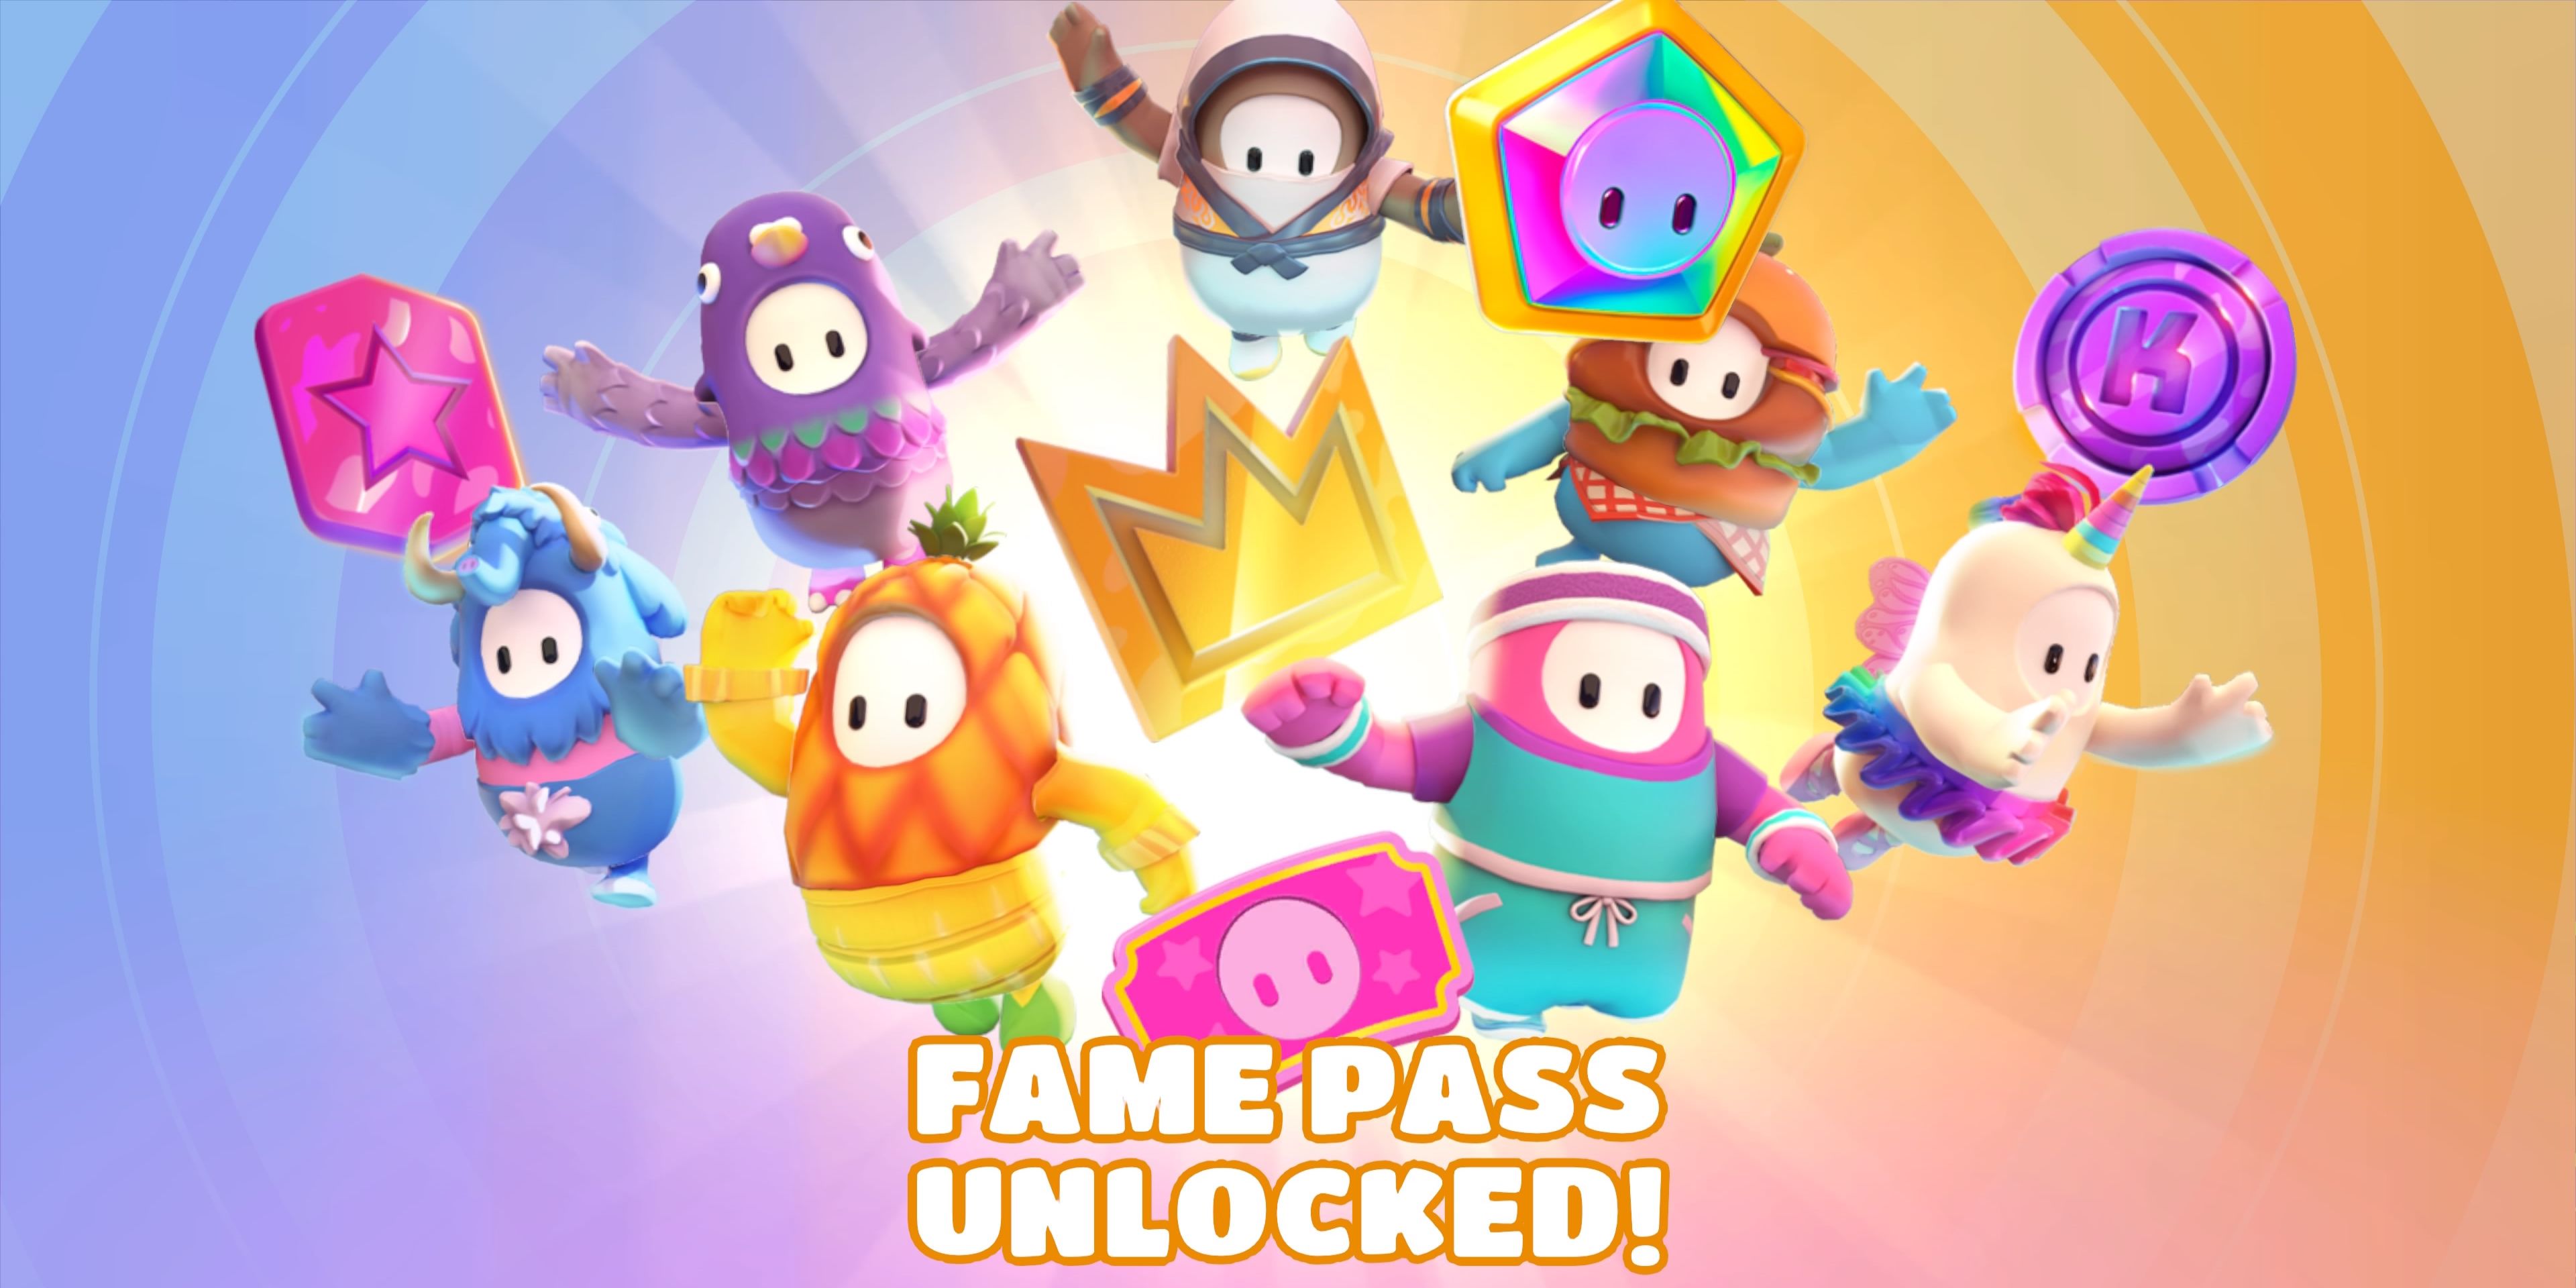 Fall Guys in different costumes and in-game currency with the text "Fame Pass Unlocked" below